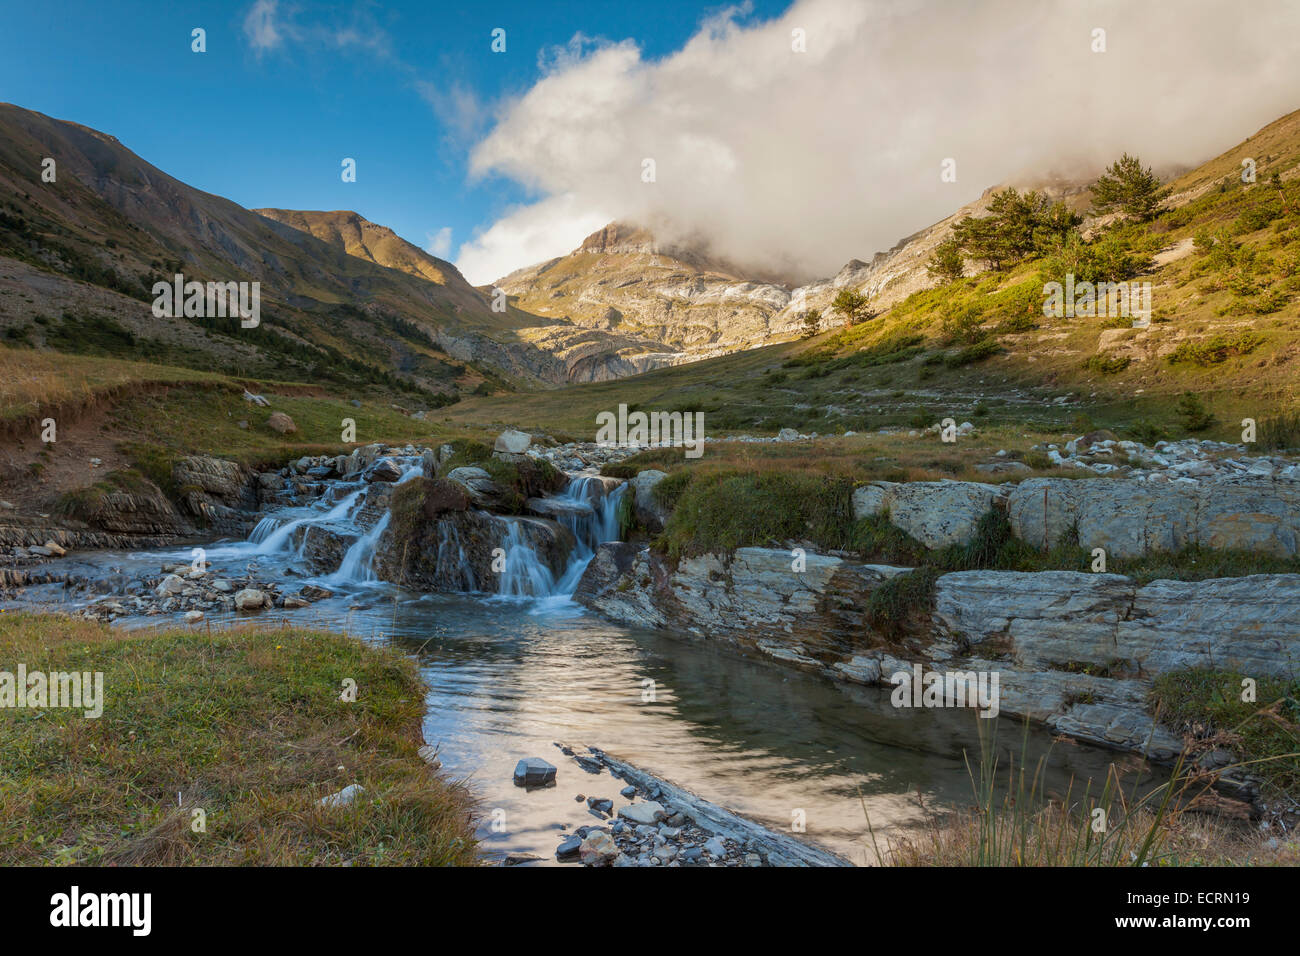 Autumn afternoon in the Pyrenees mountains, Spain. Aísa valley. Stock Photo